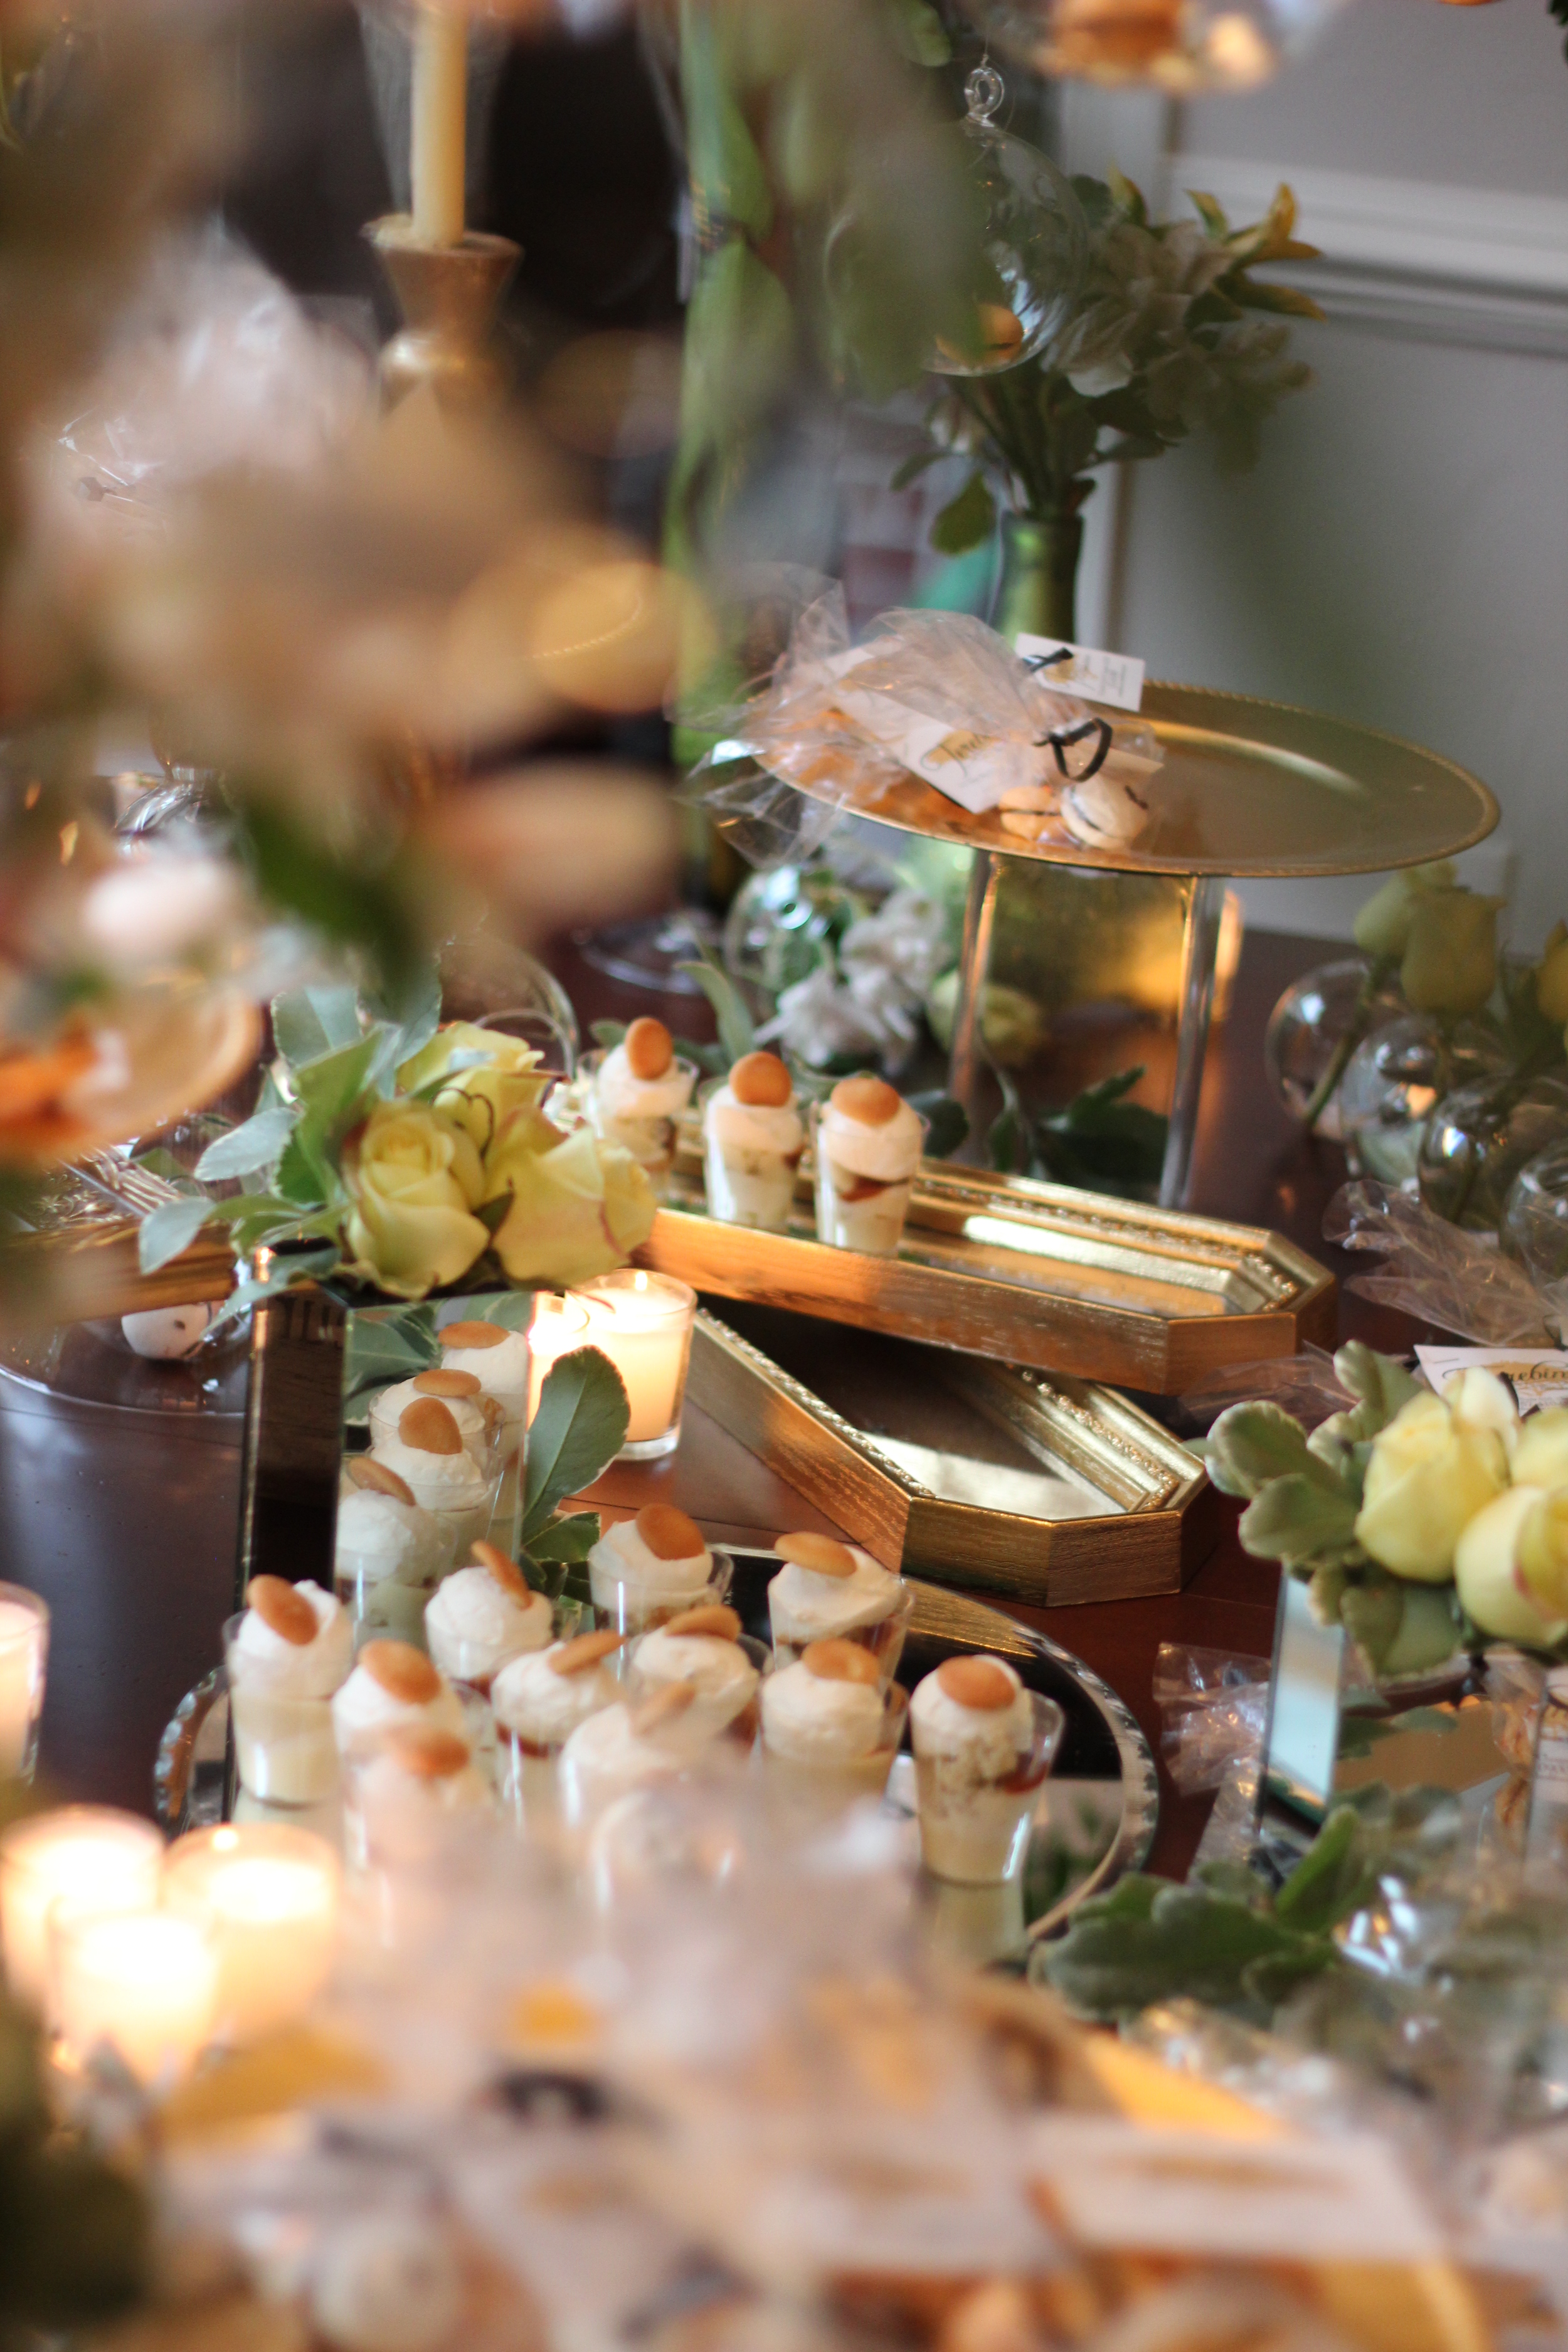   Terebinth Patisserie and Bistro &nbsp;with event planning by&nbsp; Ted Martinez  